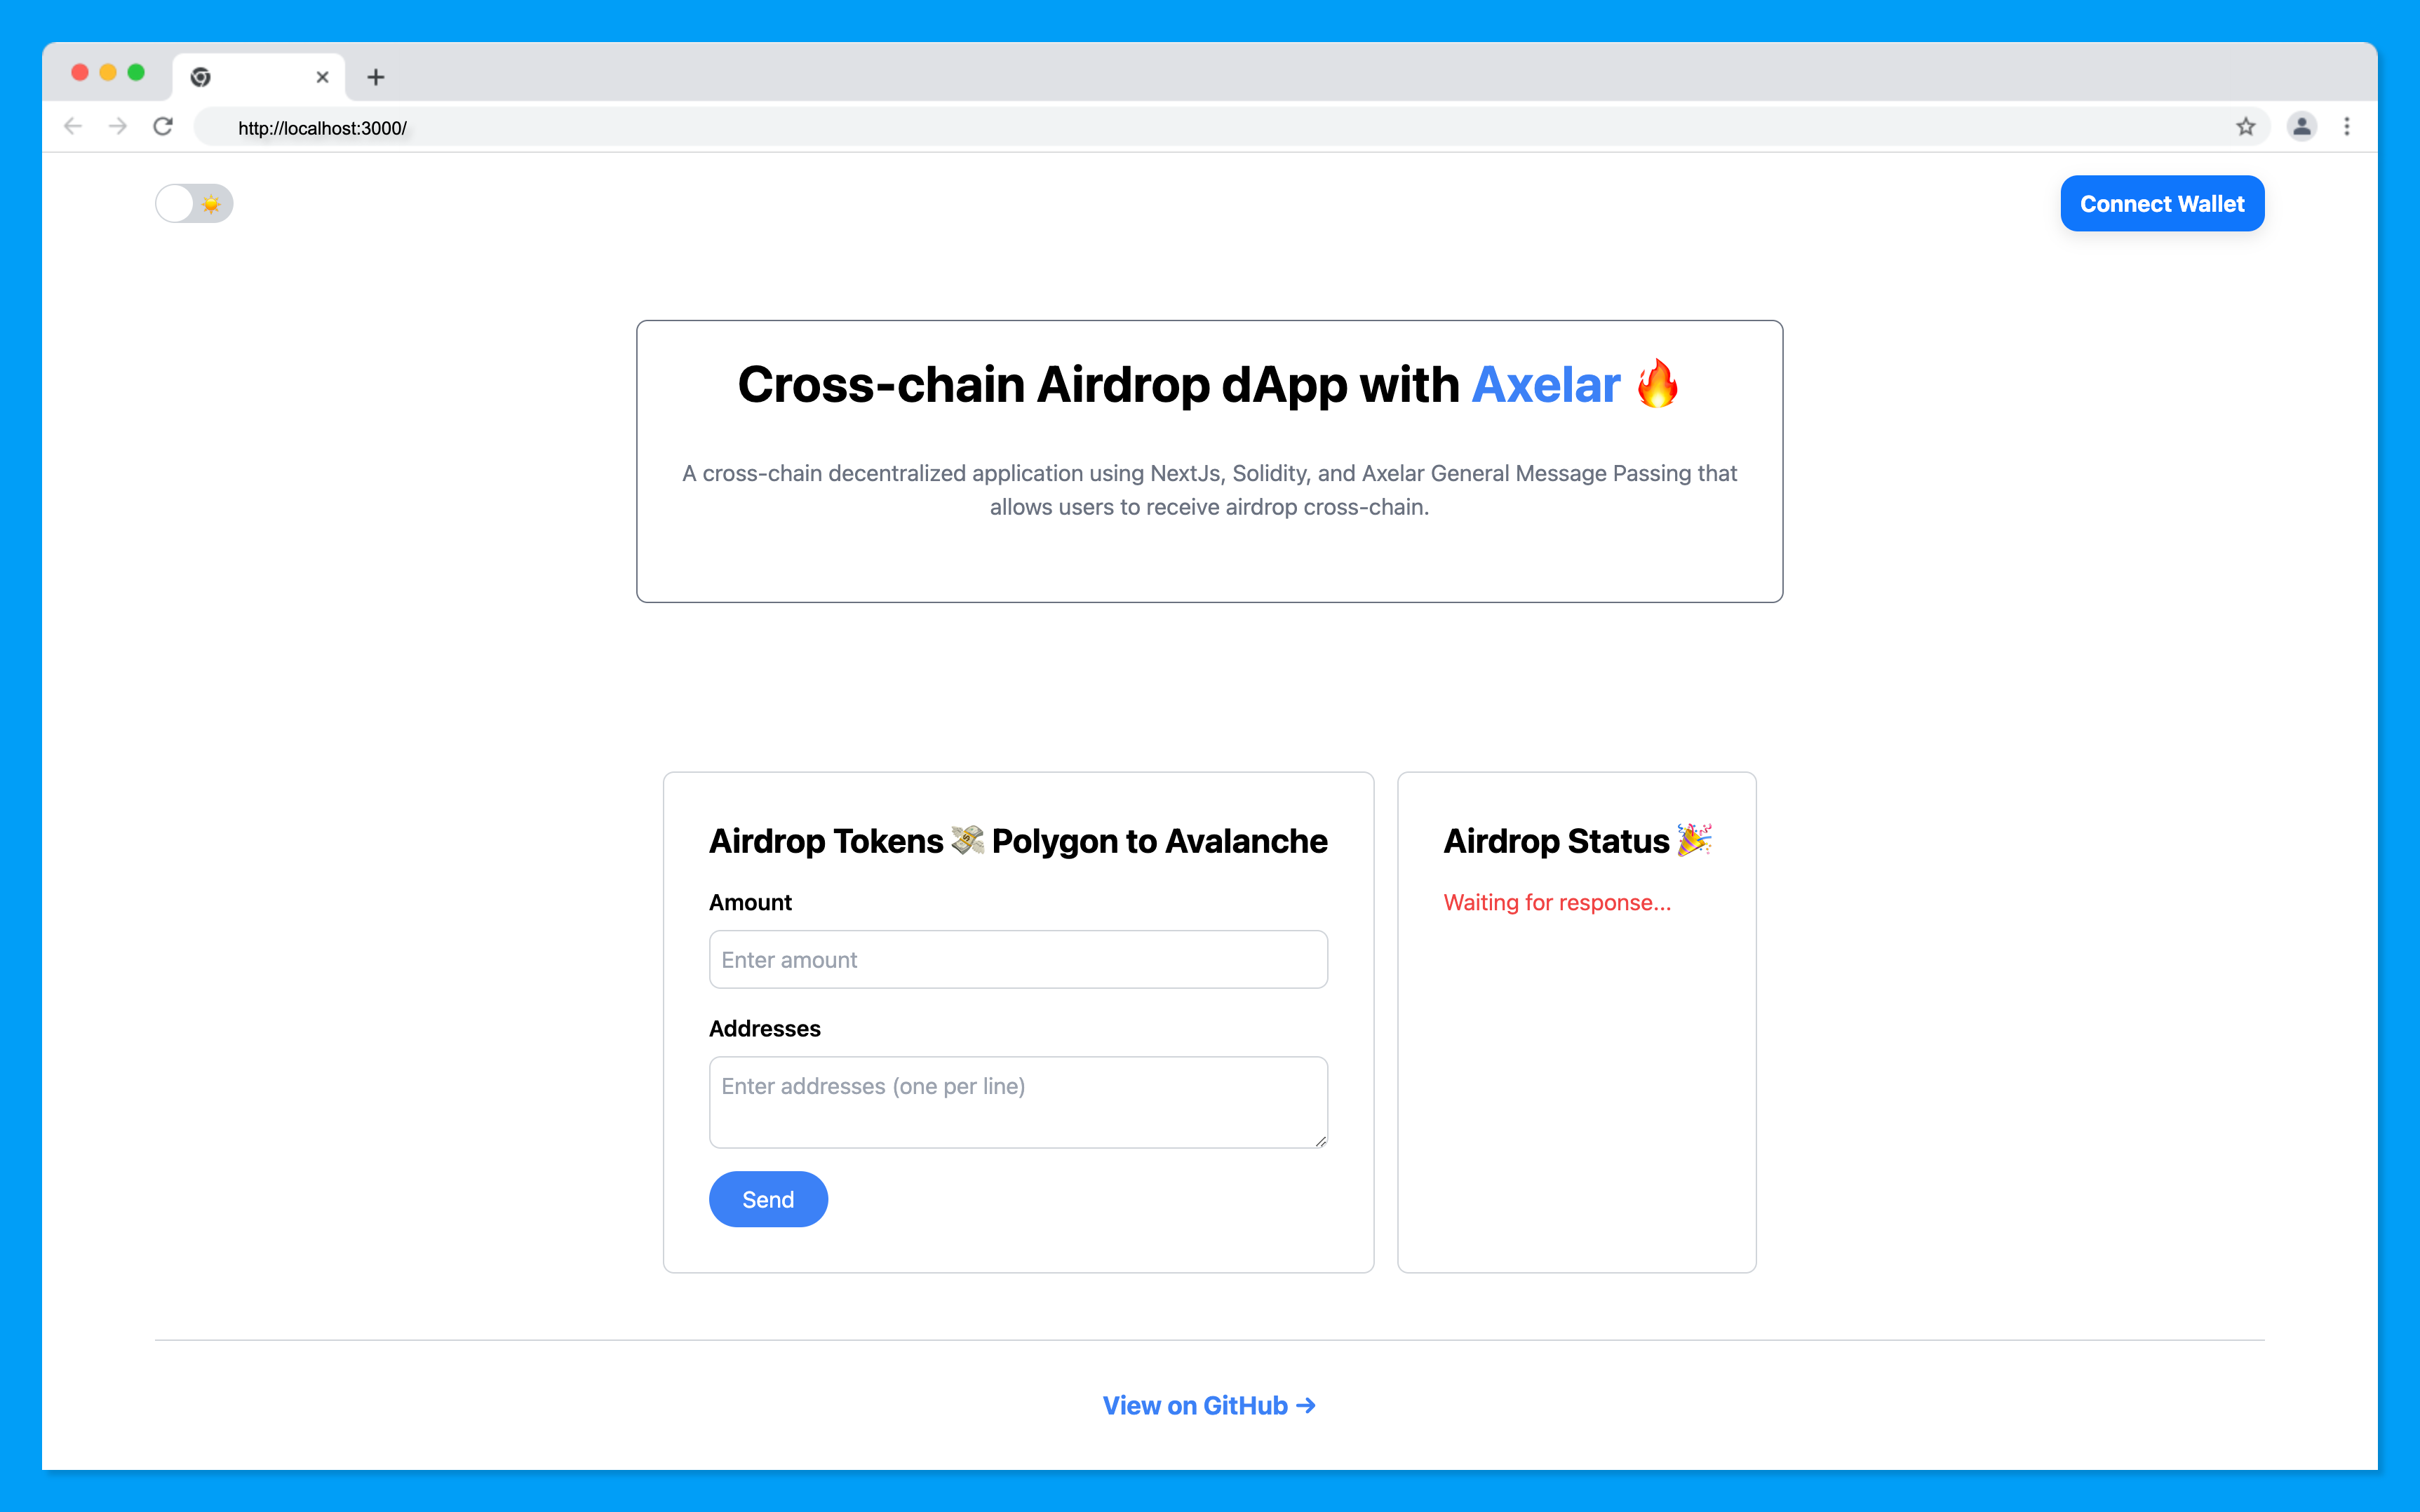 How to Build a Cross-chain Airdrop DApp with Solidity, Next.js & Axelar